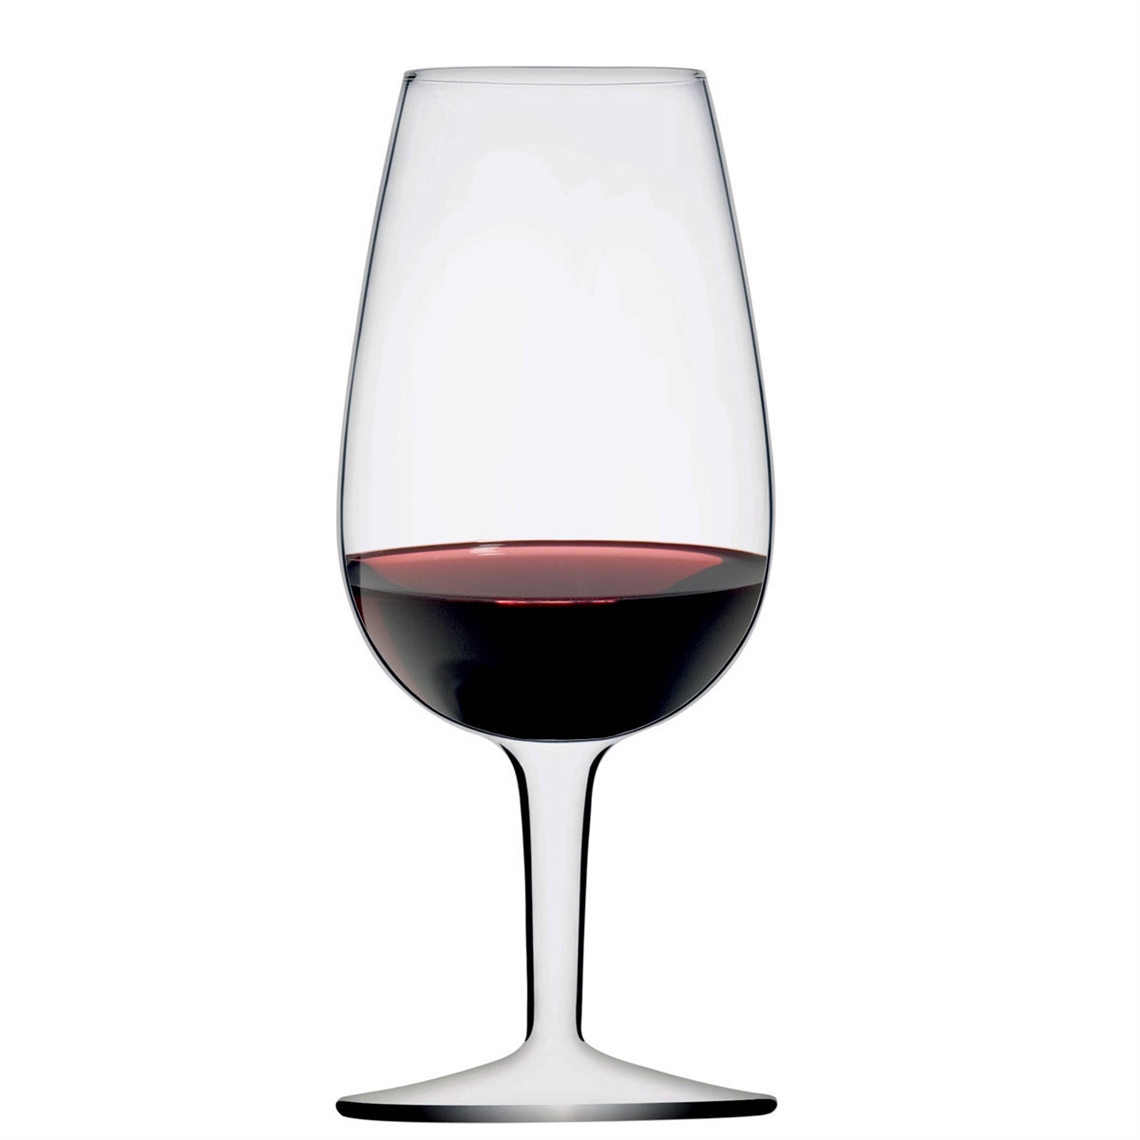 View more cocktail glasses from our Wine Tasting Glasses range